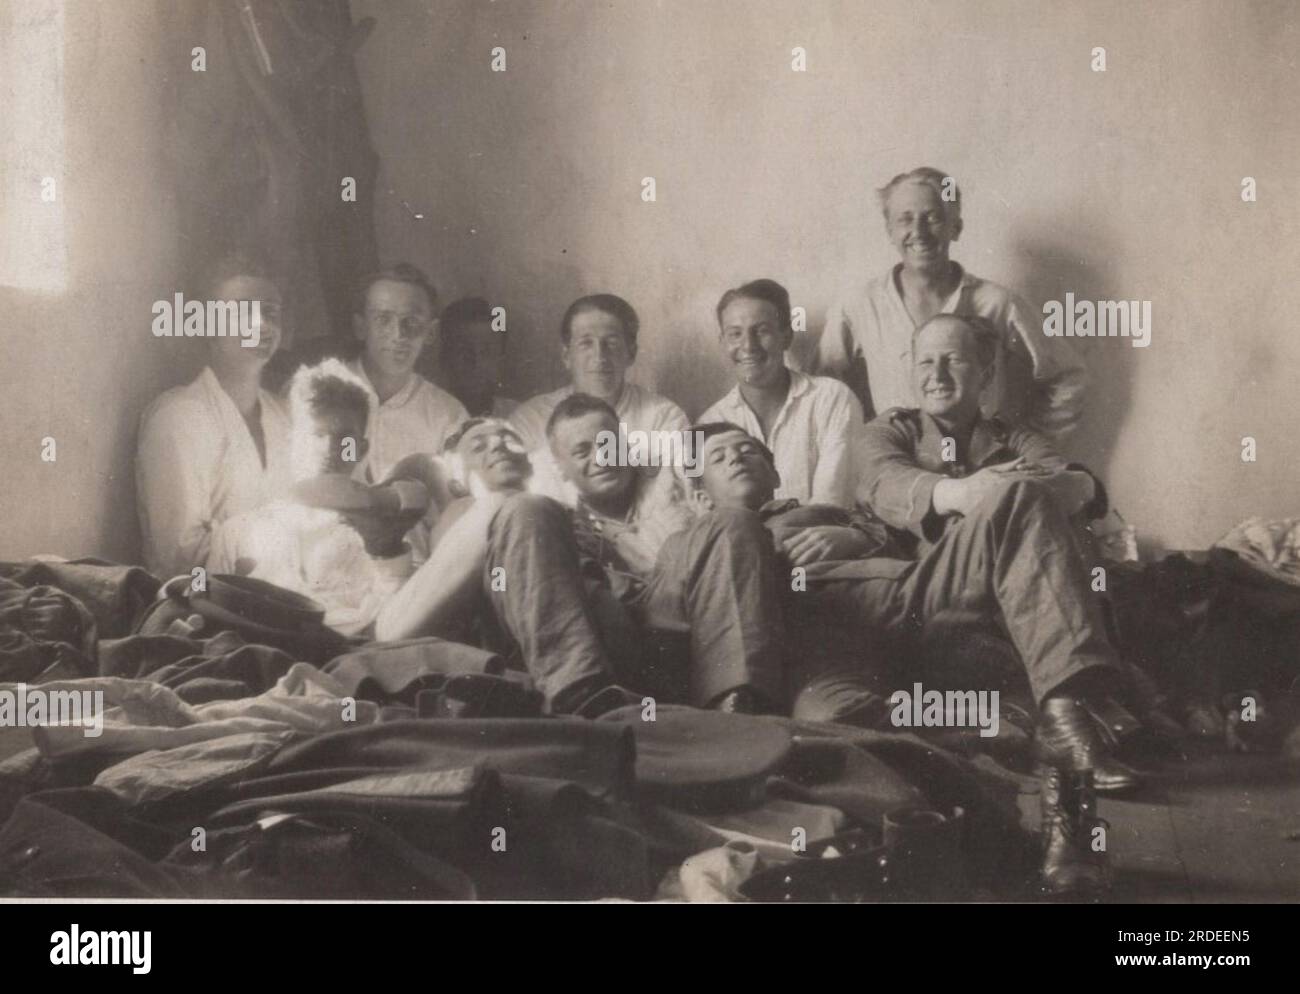 injured or just resting troops from the first world war ( Great war) looks like the athmosphere was pretty good as everyone was smiling. 1910s photo Stock Photo